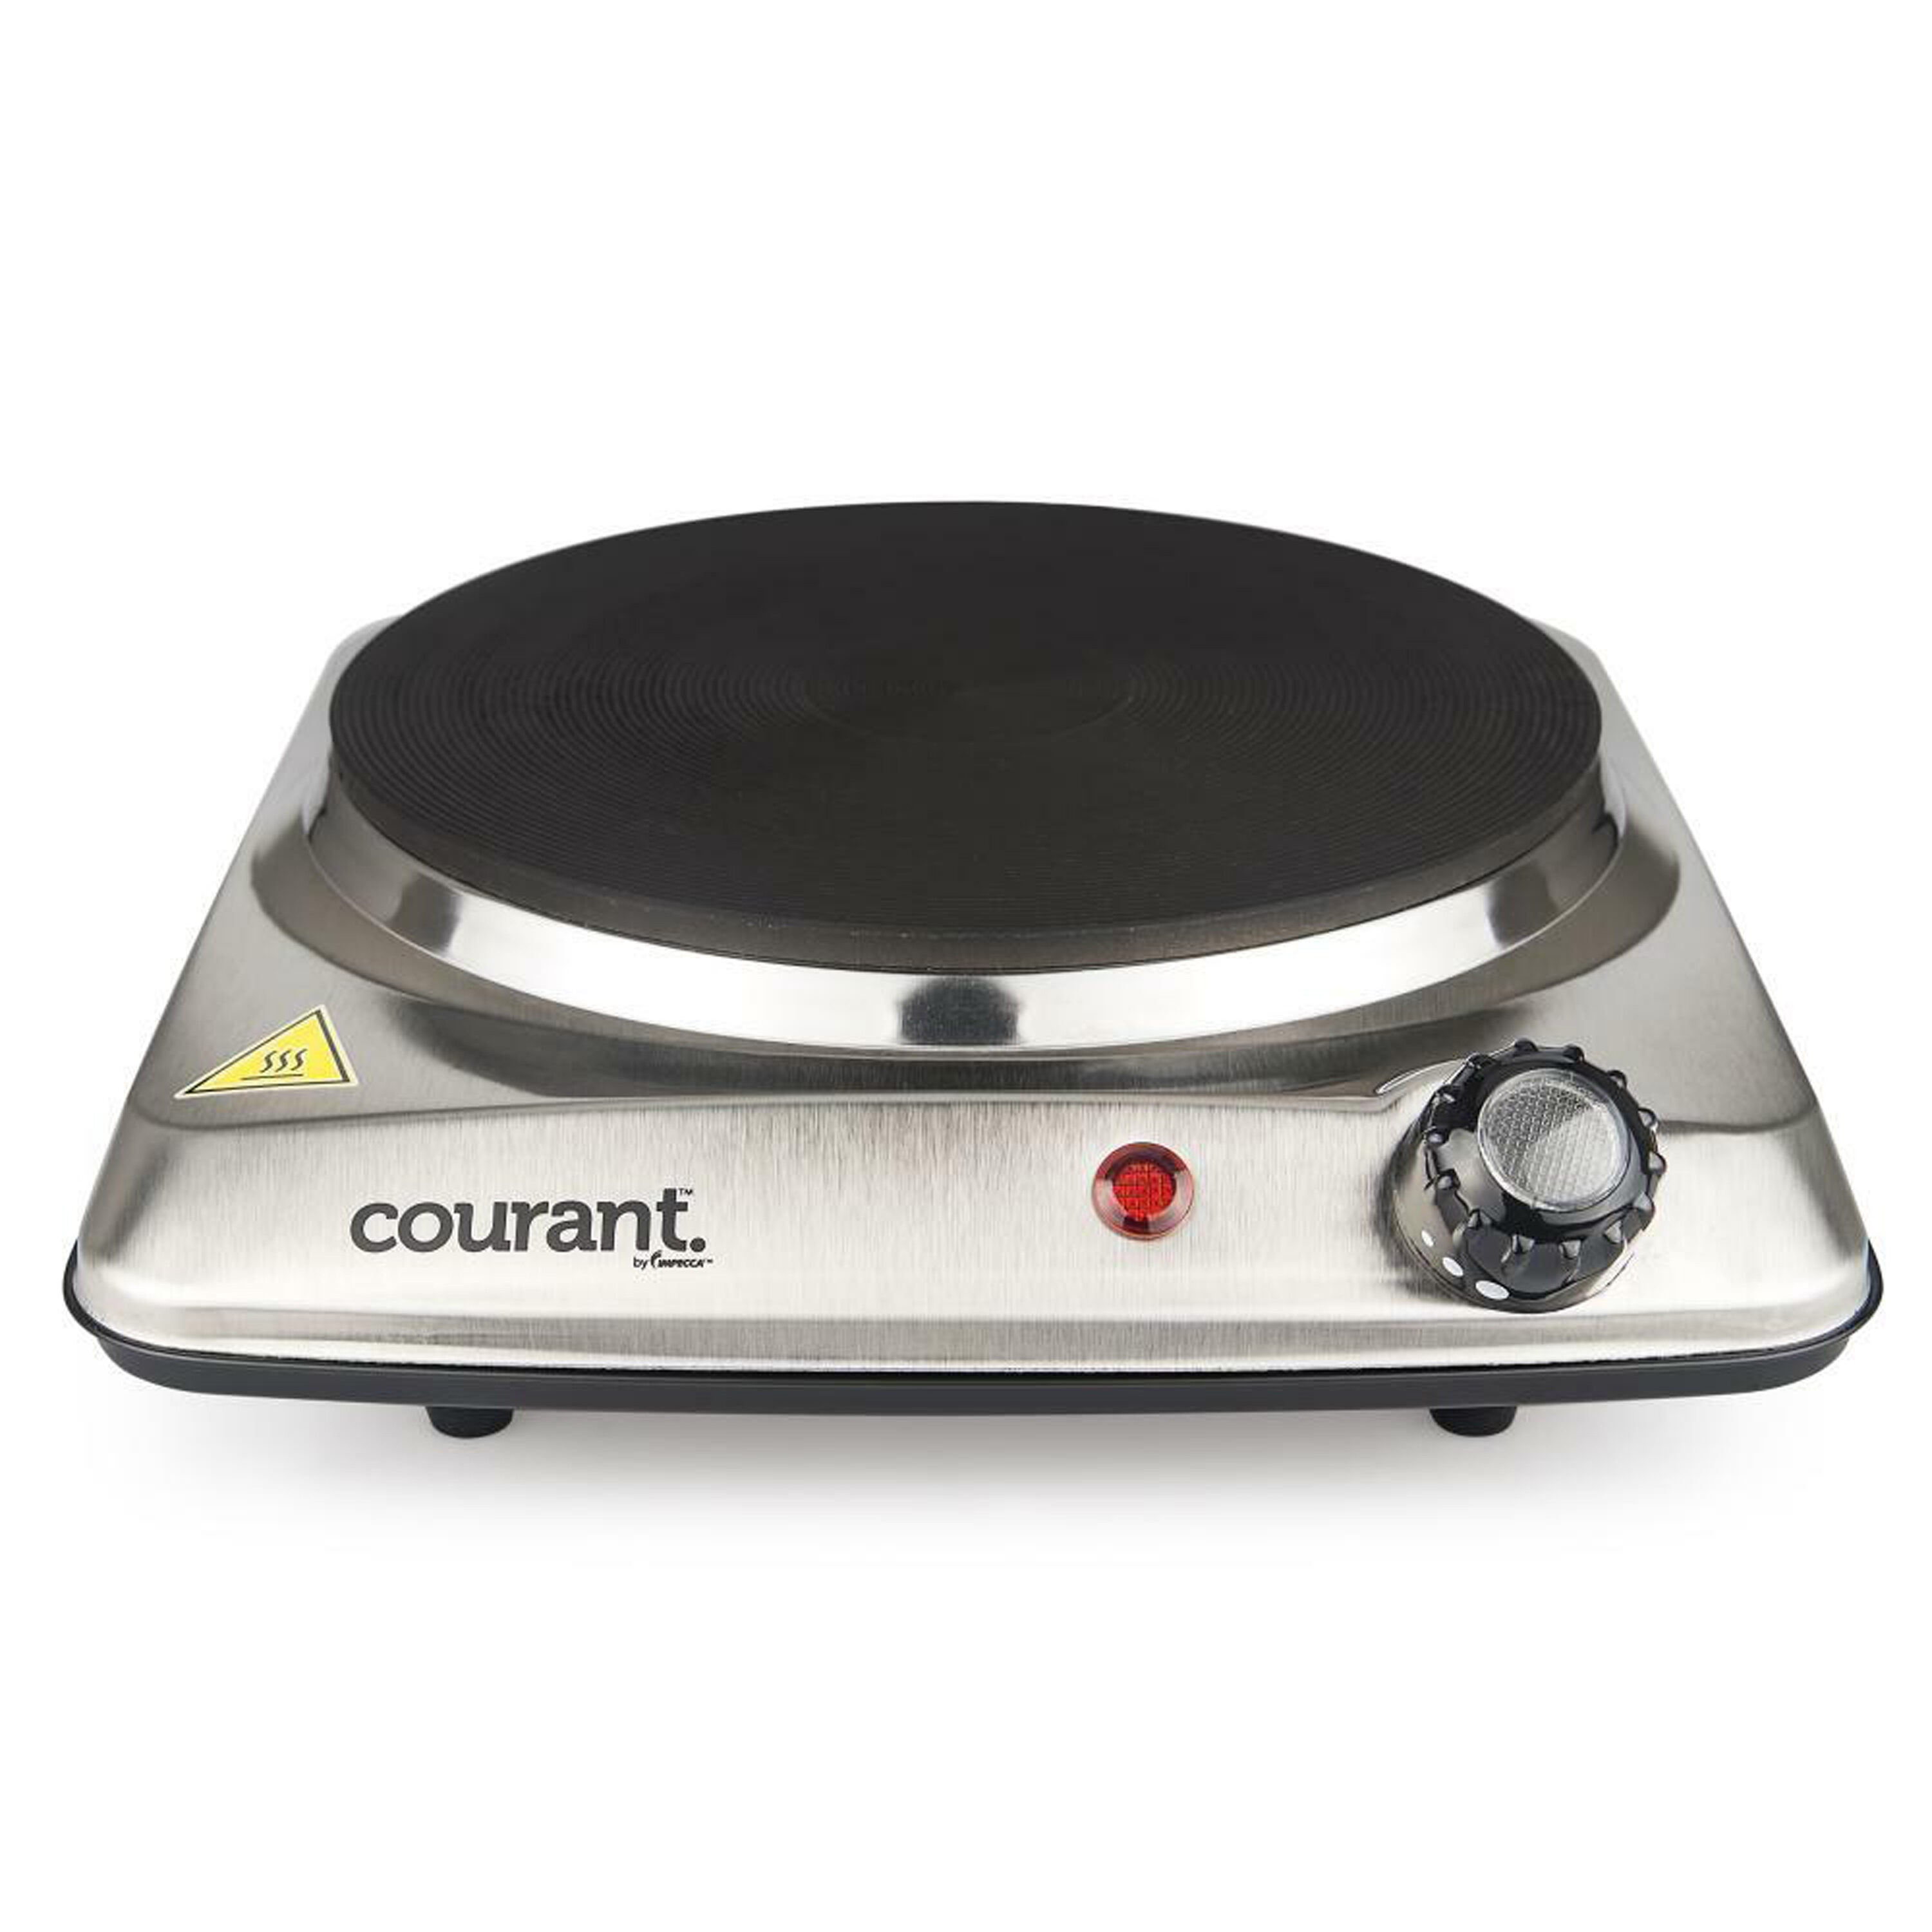 Jeremy Cass 10.34-in 2 Burners Stainless Steel Electric Hot Plate